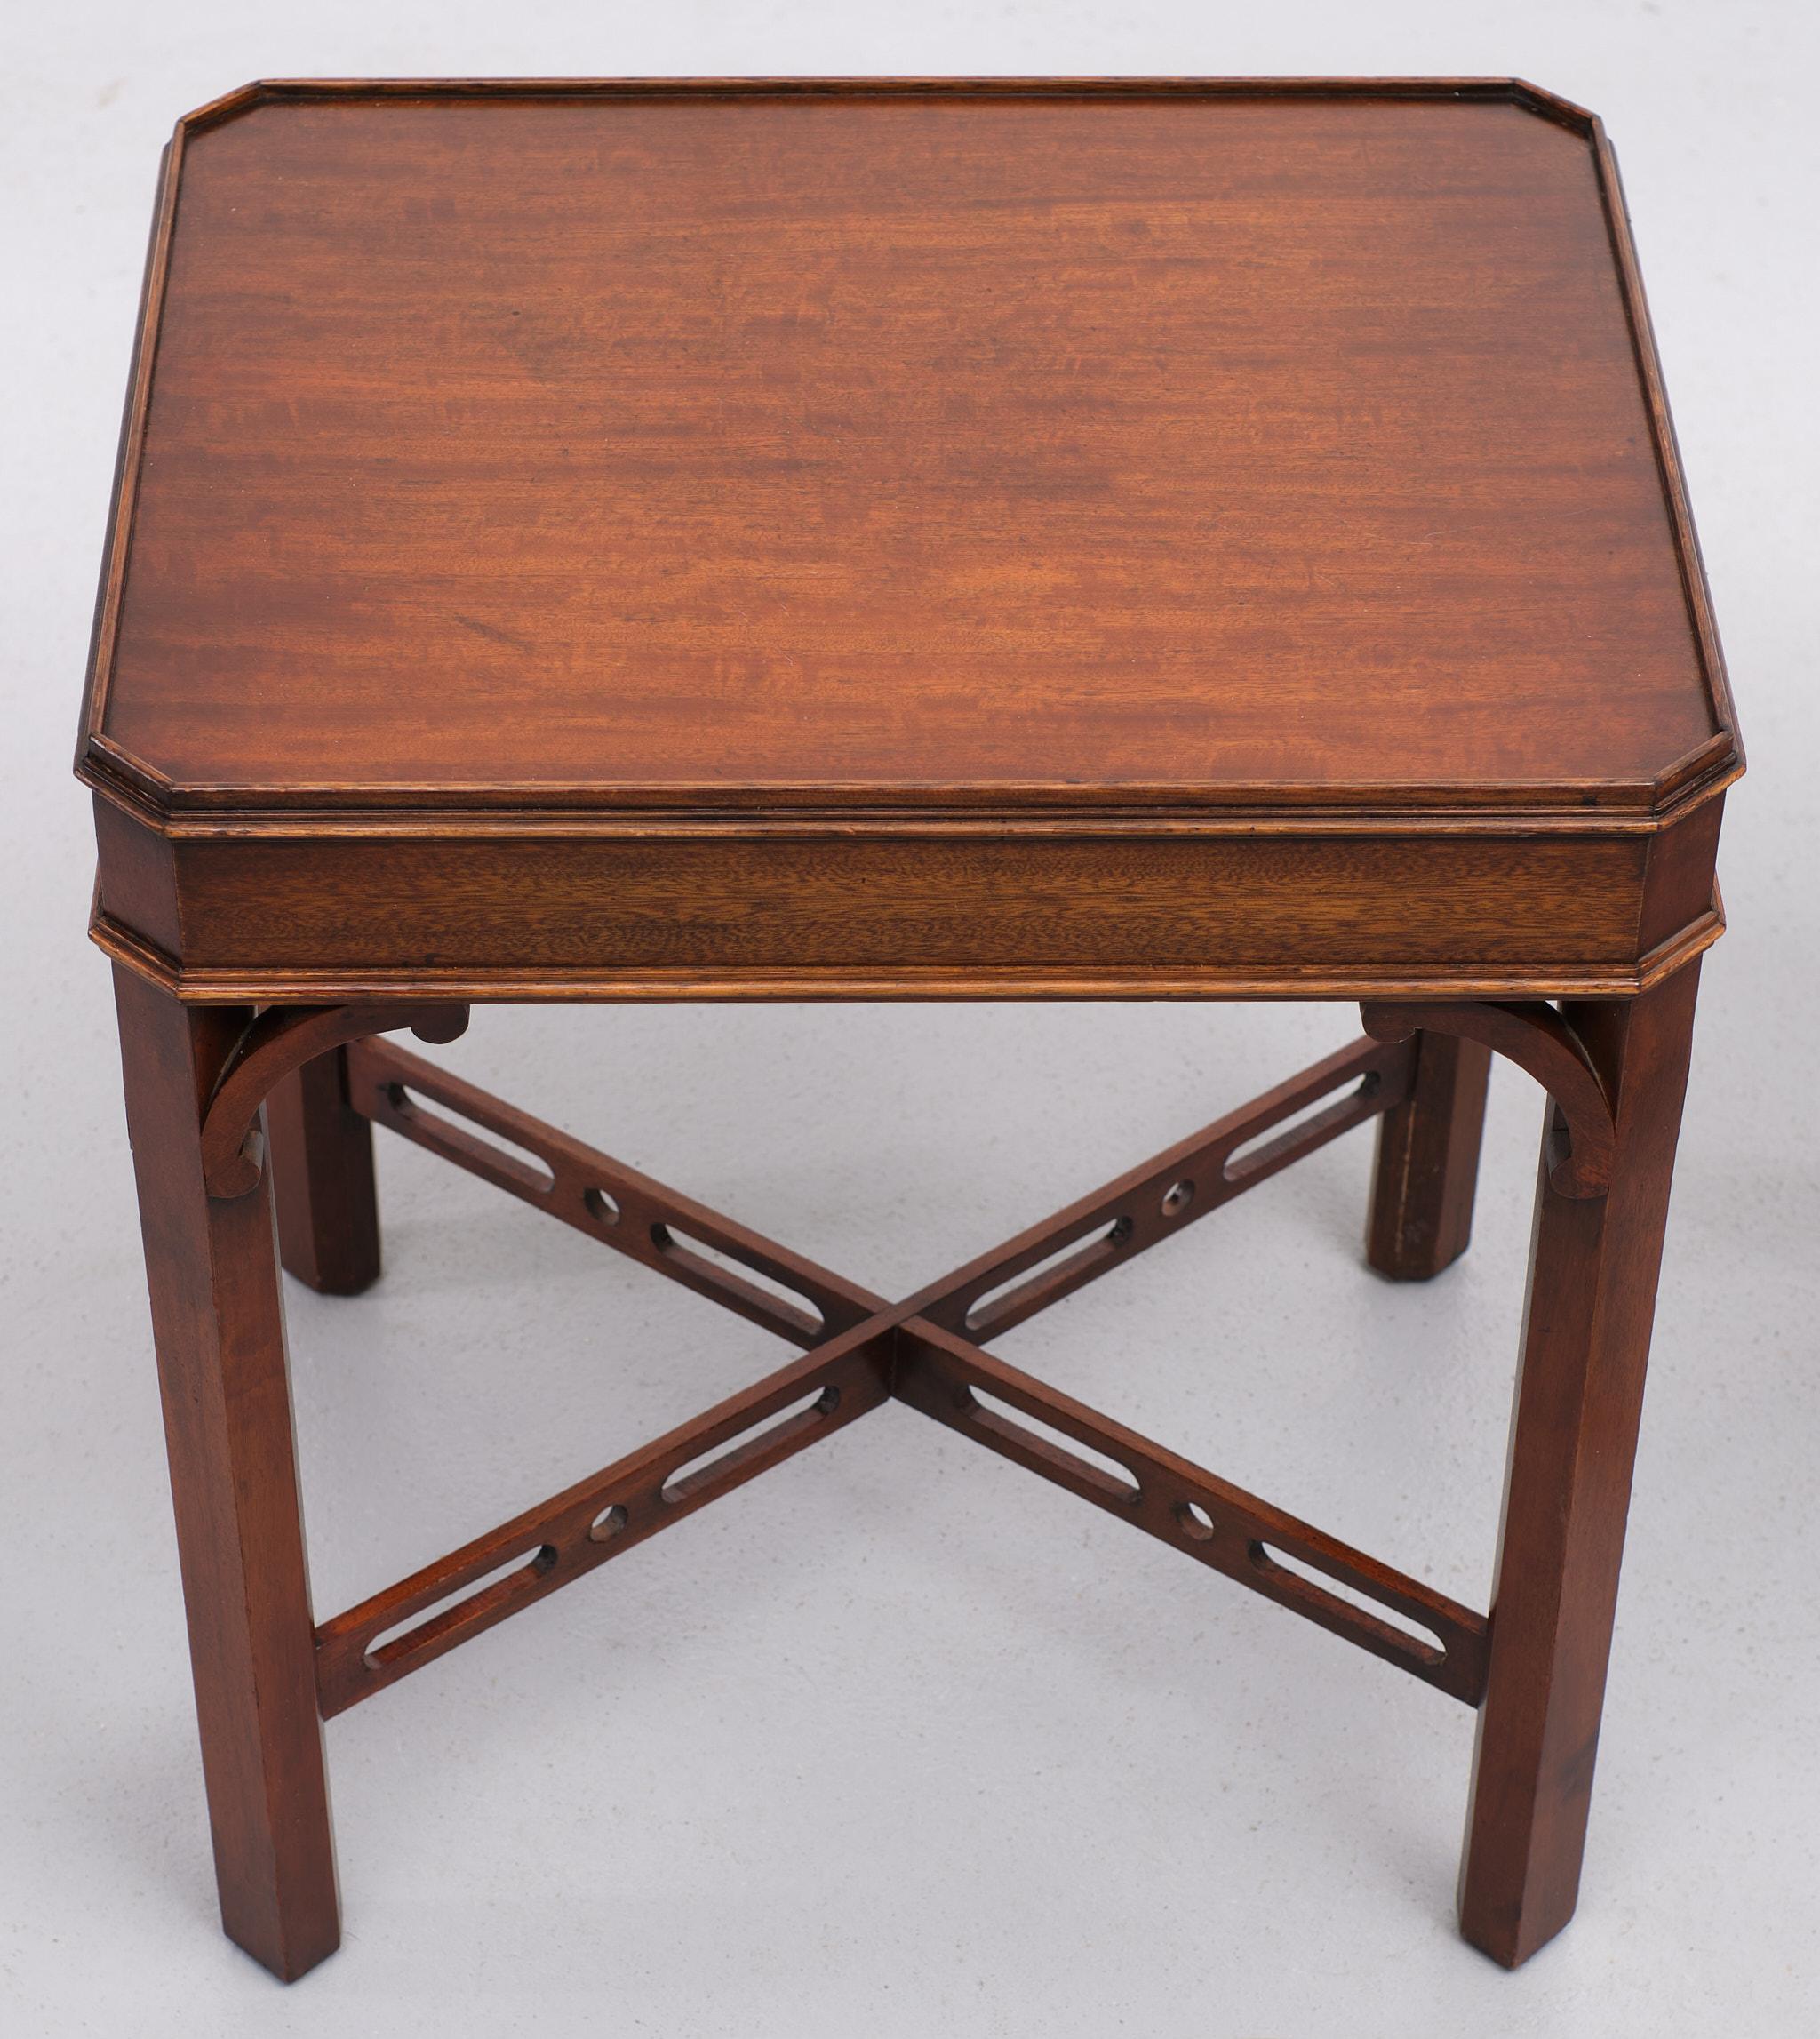 Bevan Funnell Mahogany Side Tables Georgian Revival England, 1960s For Sale 3